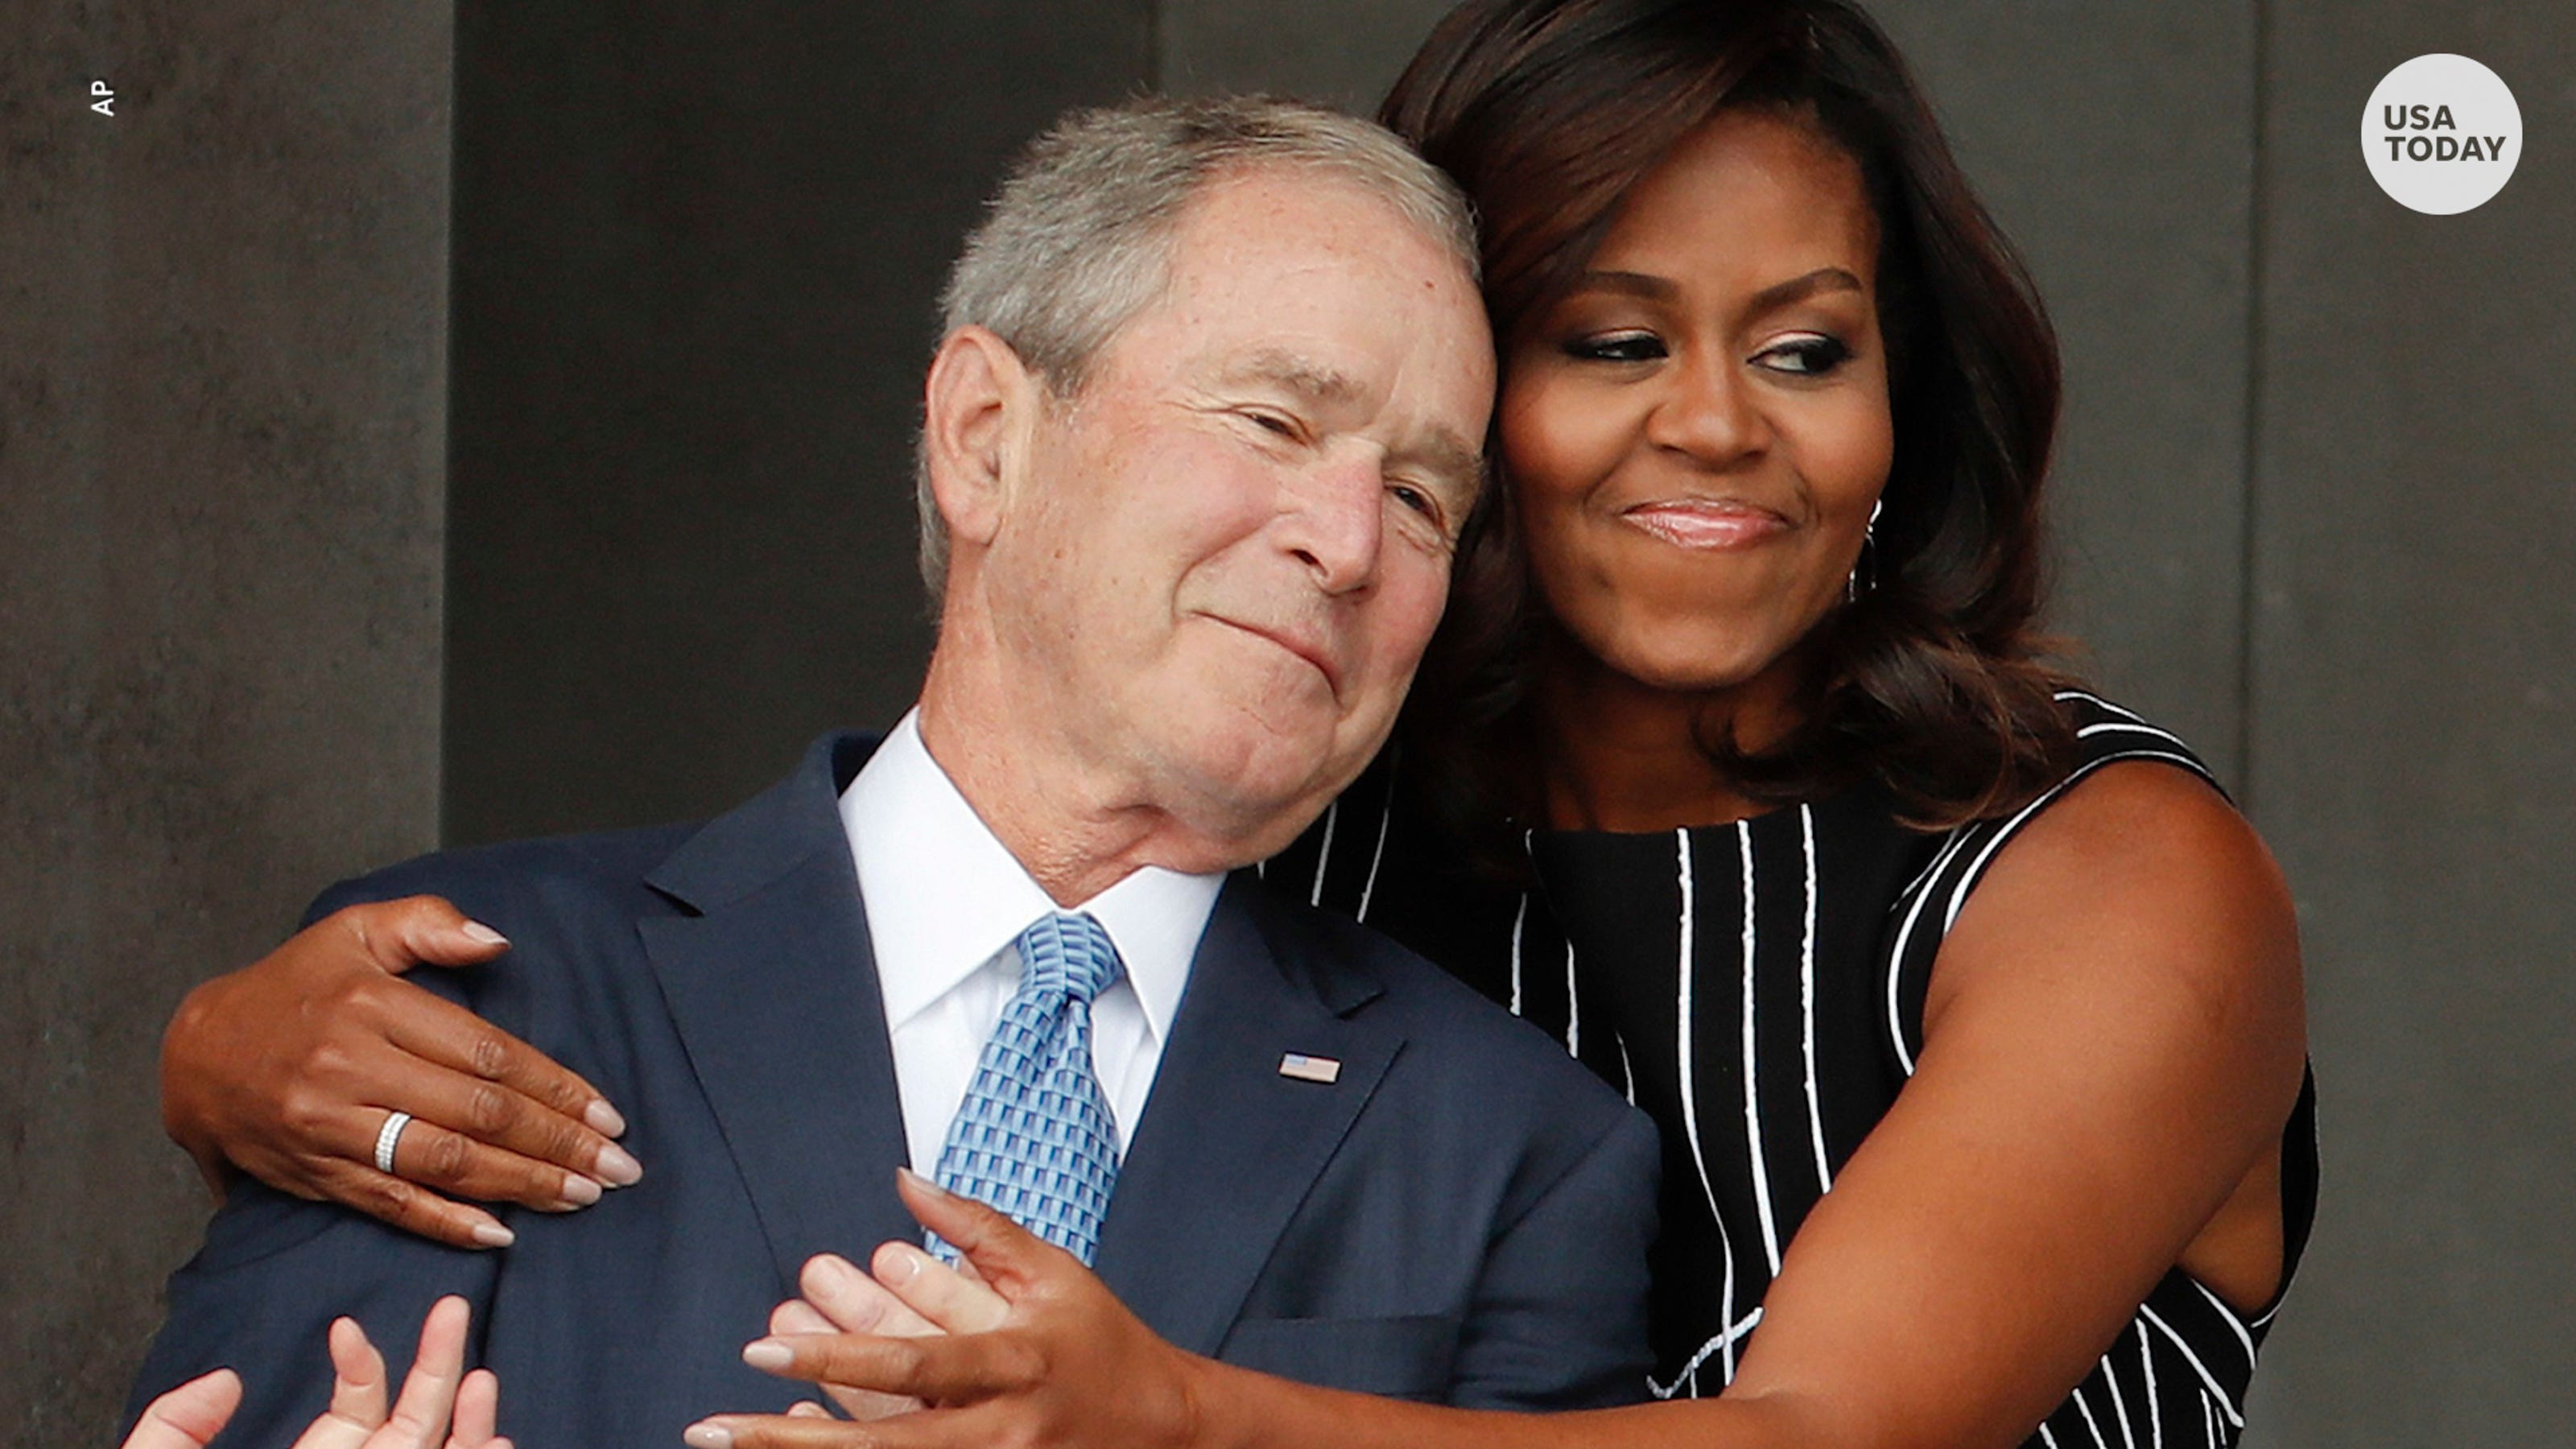 Michelle Obama and George W. Bush's friendship through the years